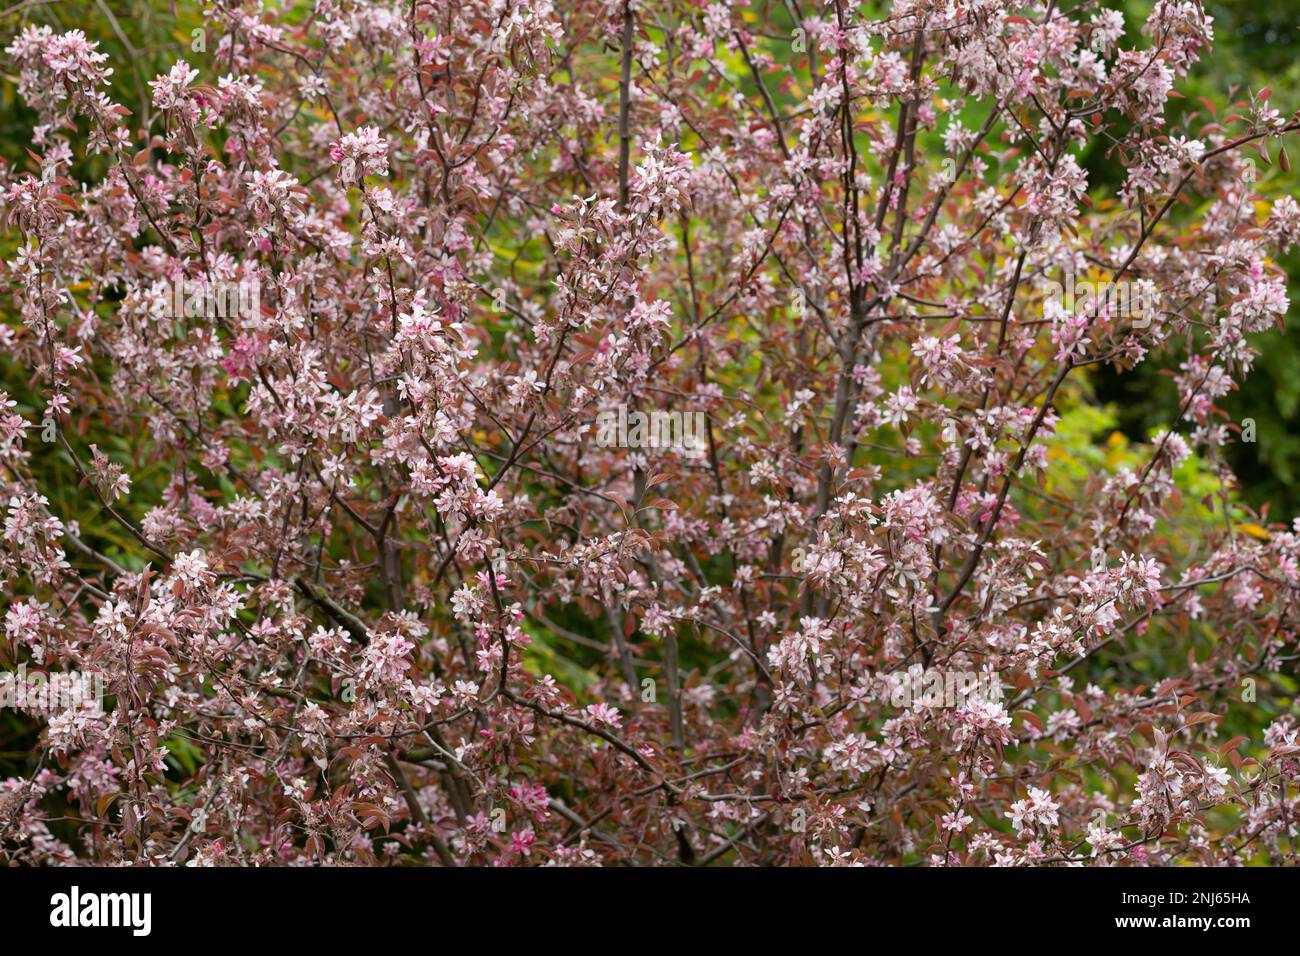 Malus niedzwetzkyana closeup, selective soft focus. Decorative apple tree with bright flowers. Purple blossoms in spring apple tree garden close up Stock Photo